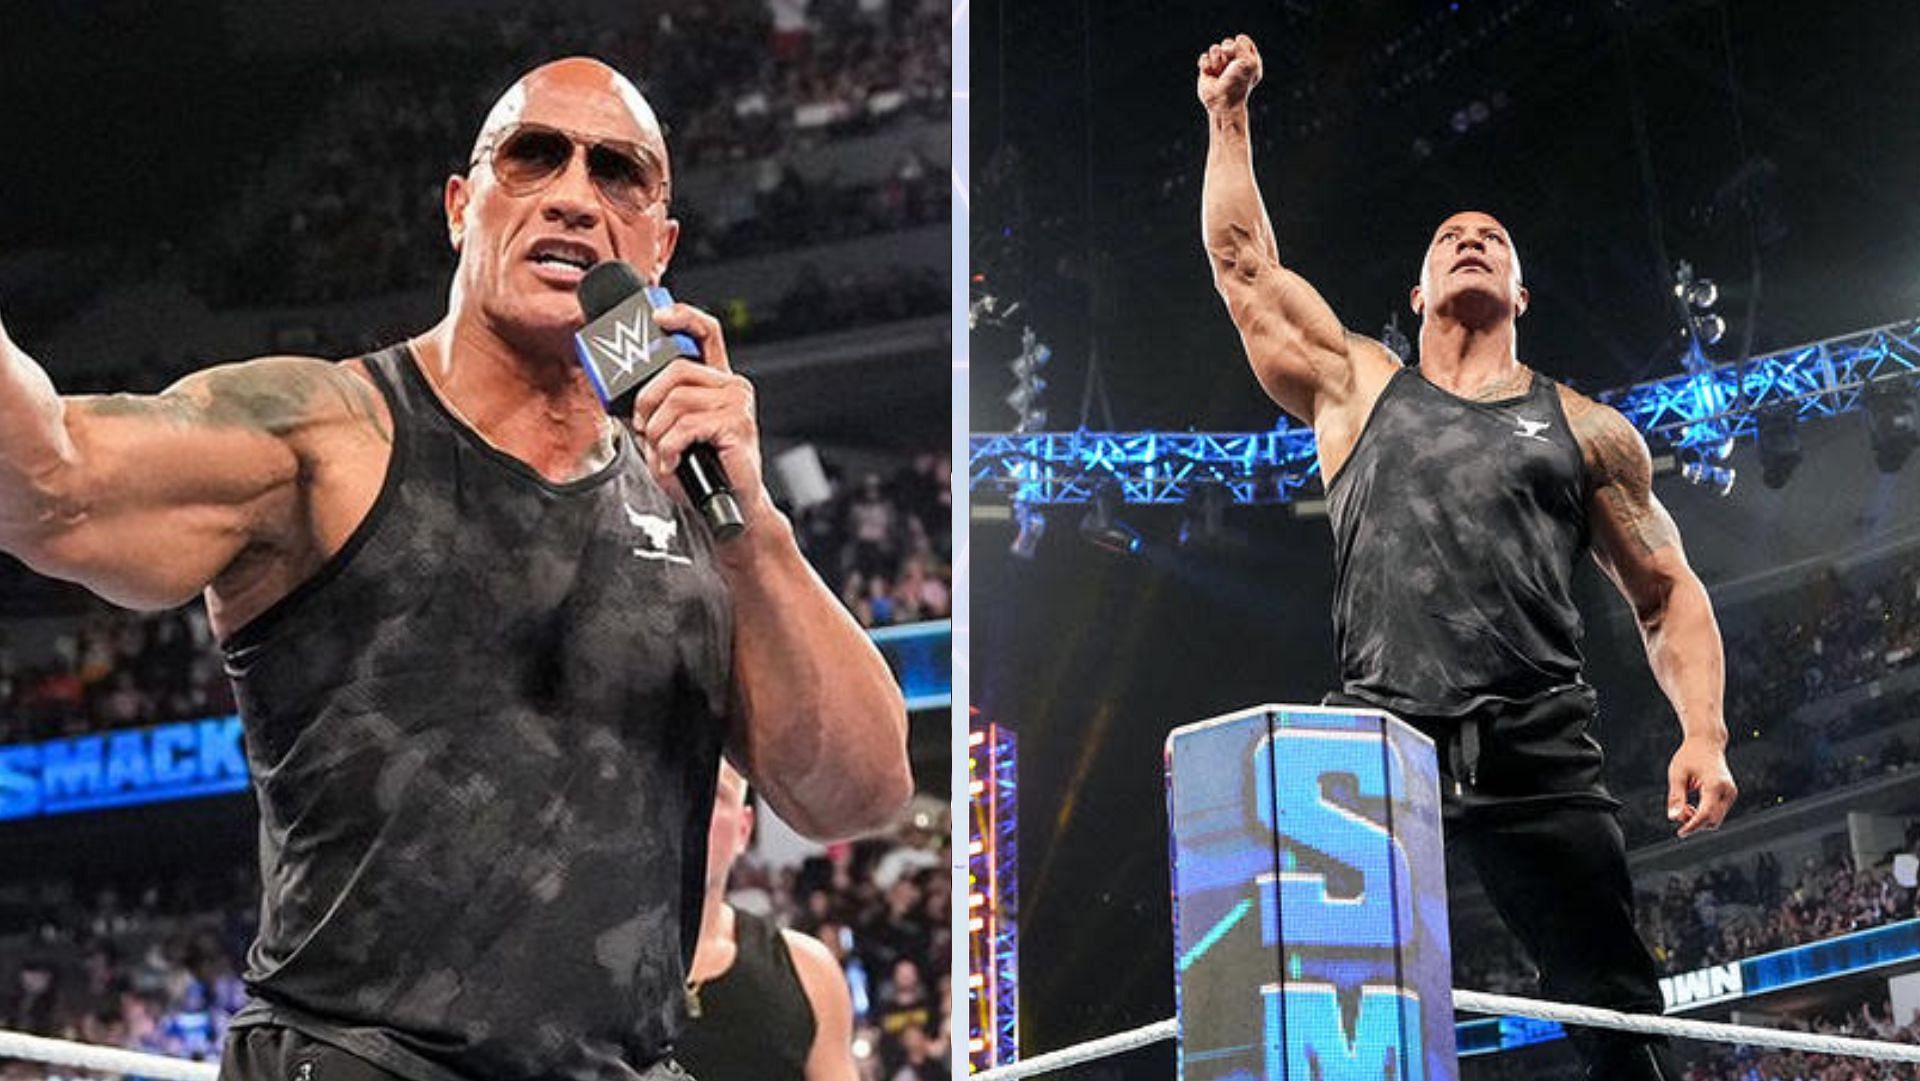 The Rock returned to WWE SmackDown alonside Pat McAfee.